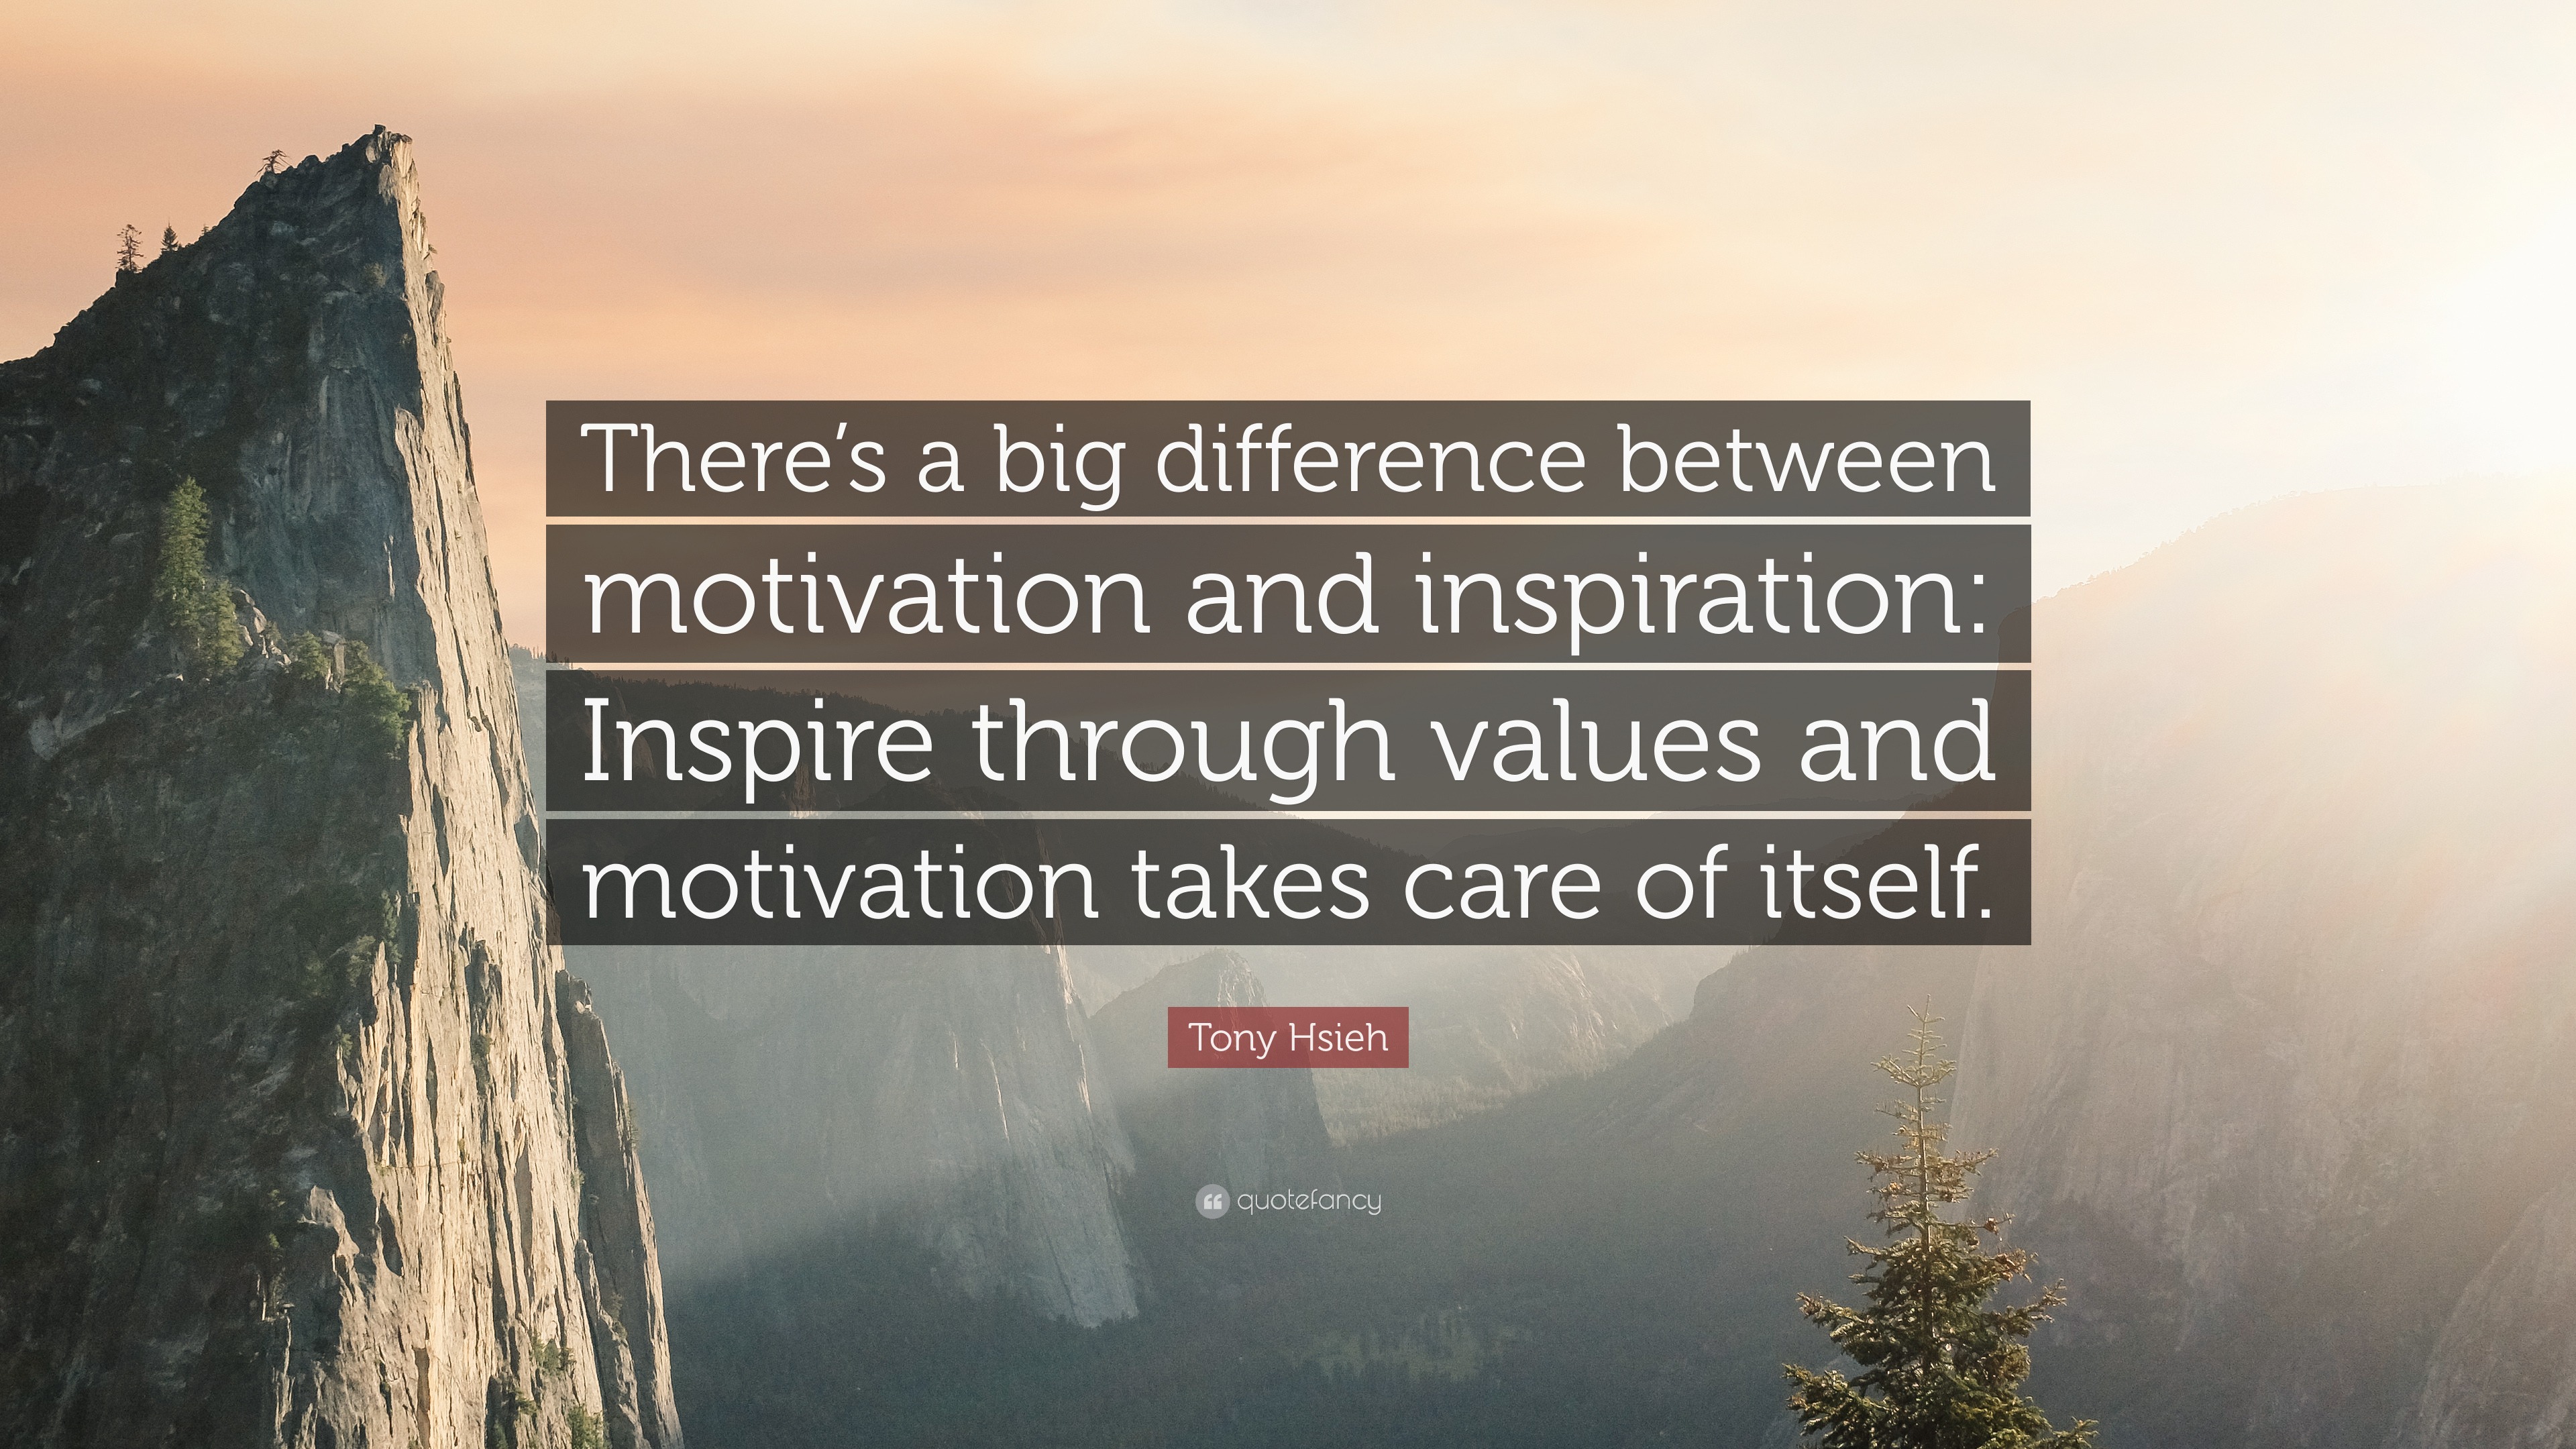 Tony Hsieh Quote: “There’s a big difference between motivation and